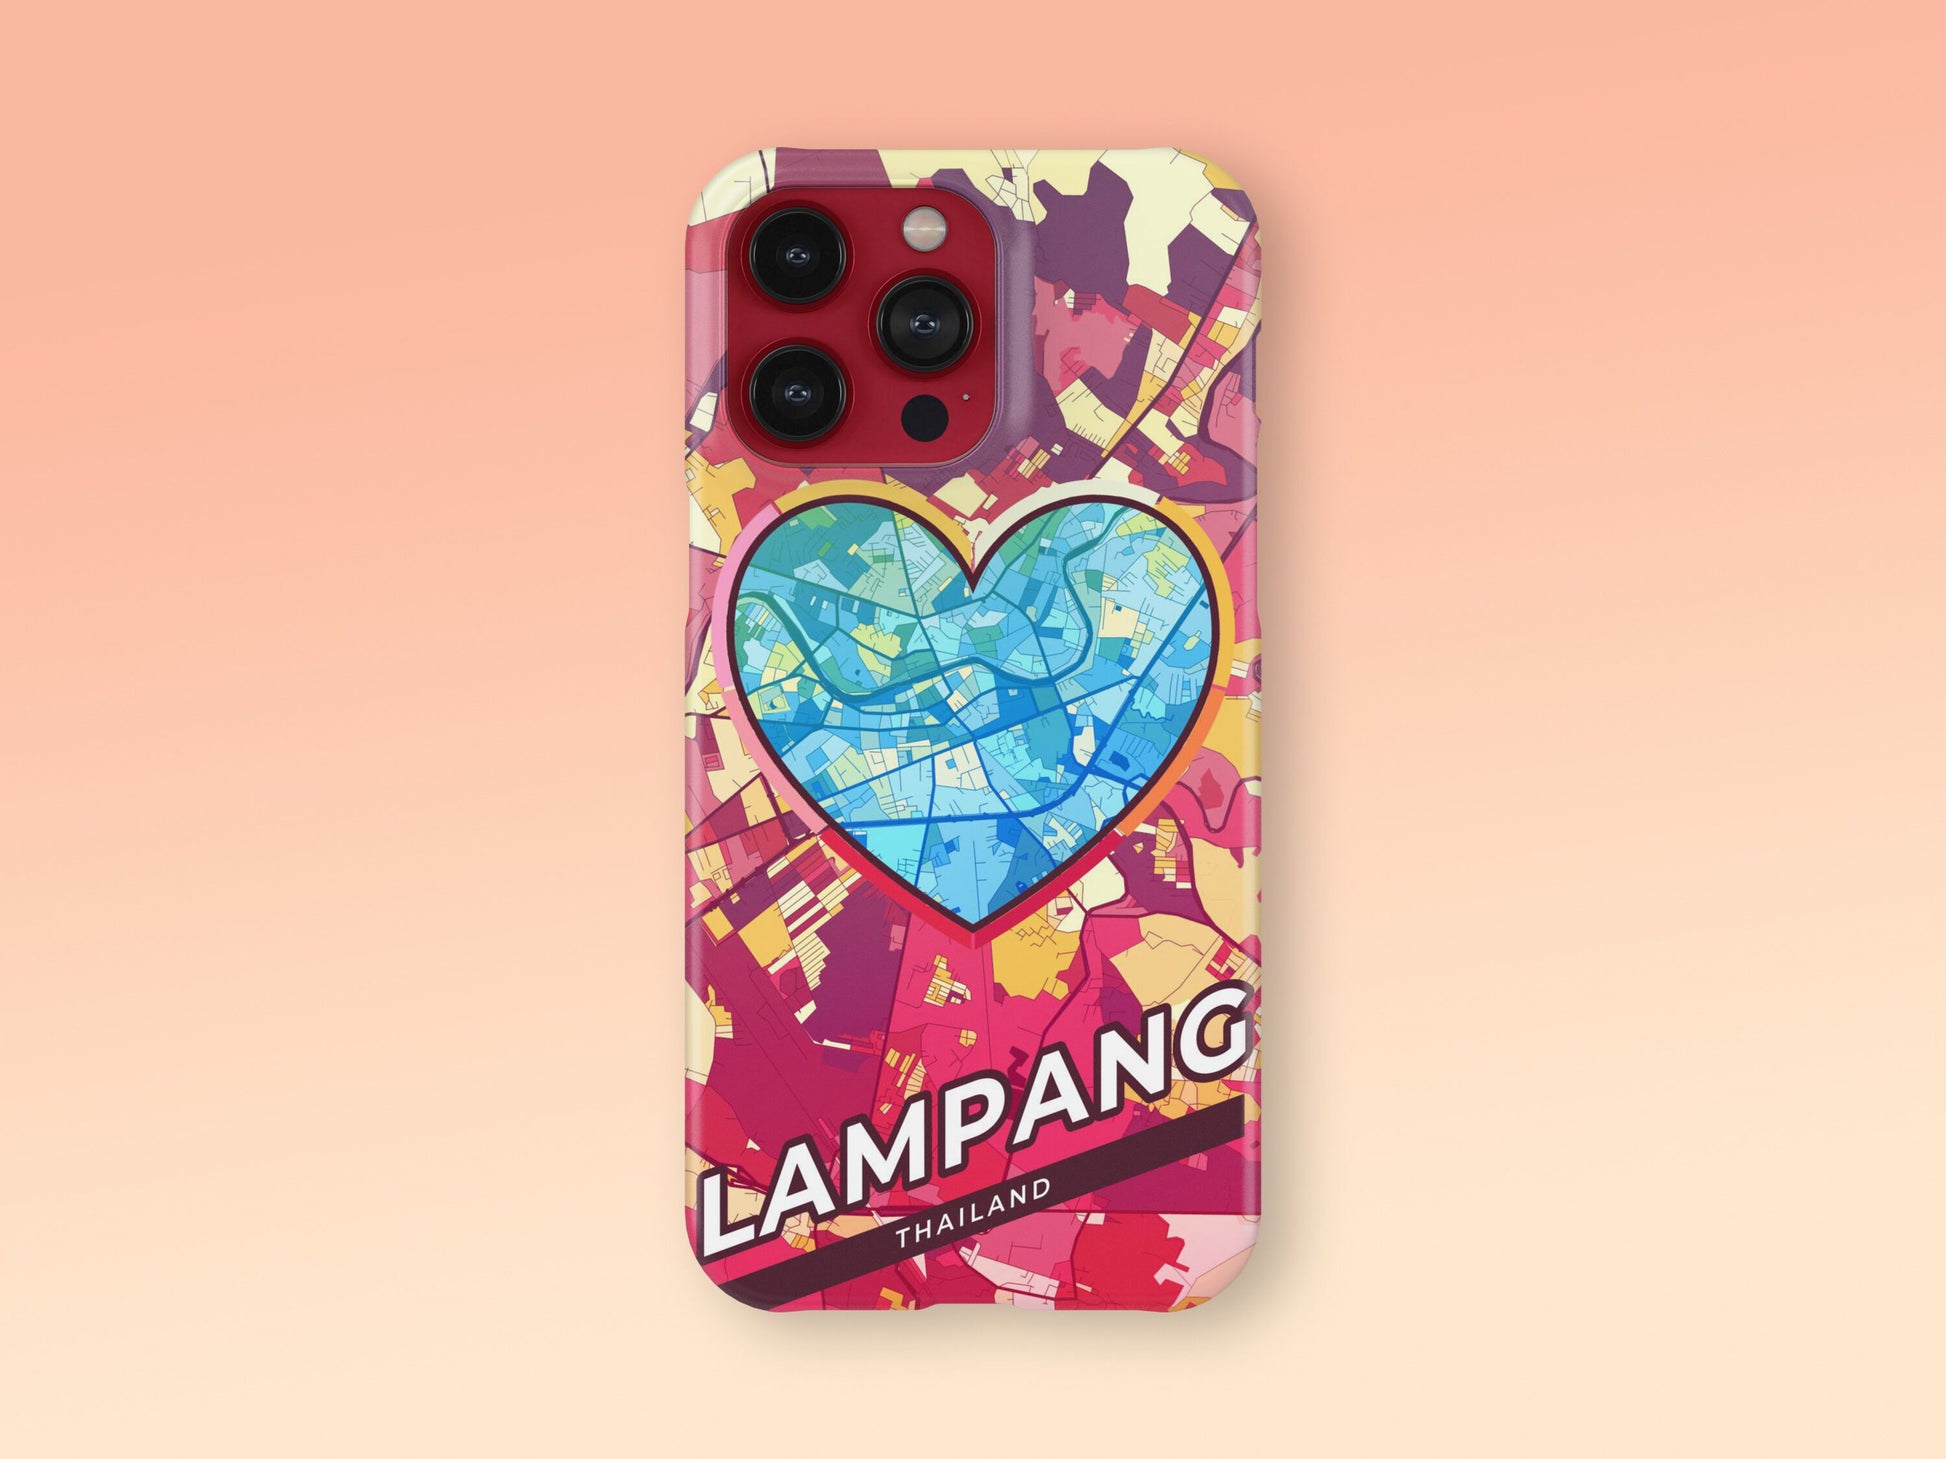 Lampang Thailand slim phone case with colorful icon. Birthday, wedding or housewarming gift. Couple match cases. 2